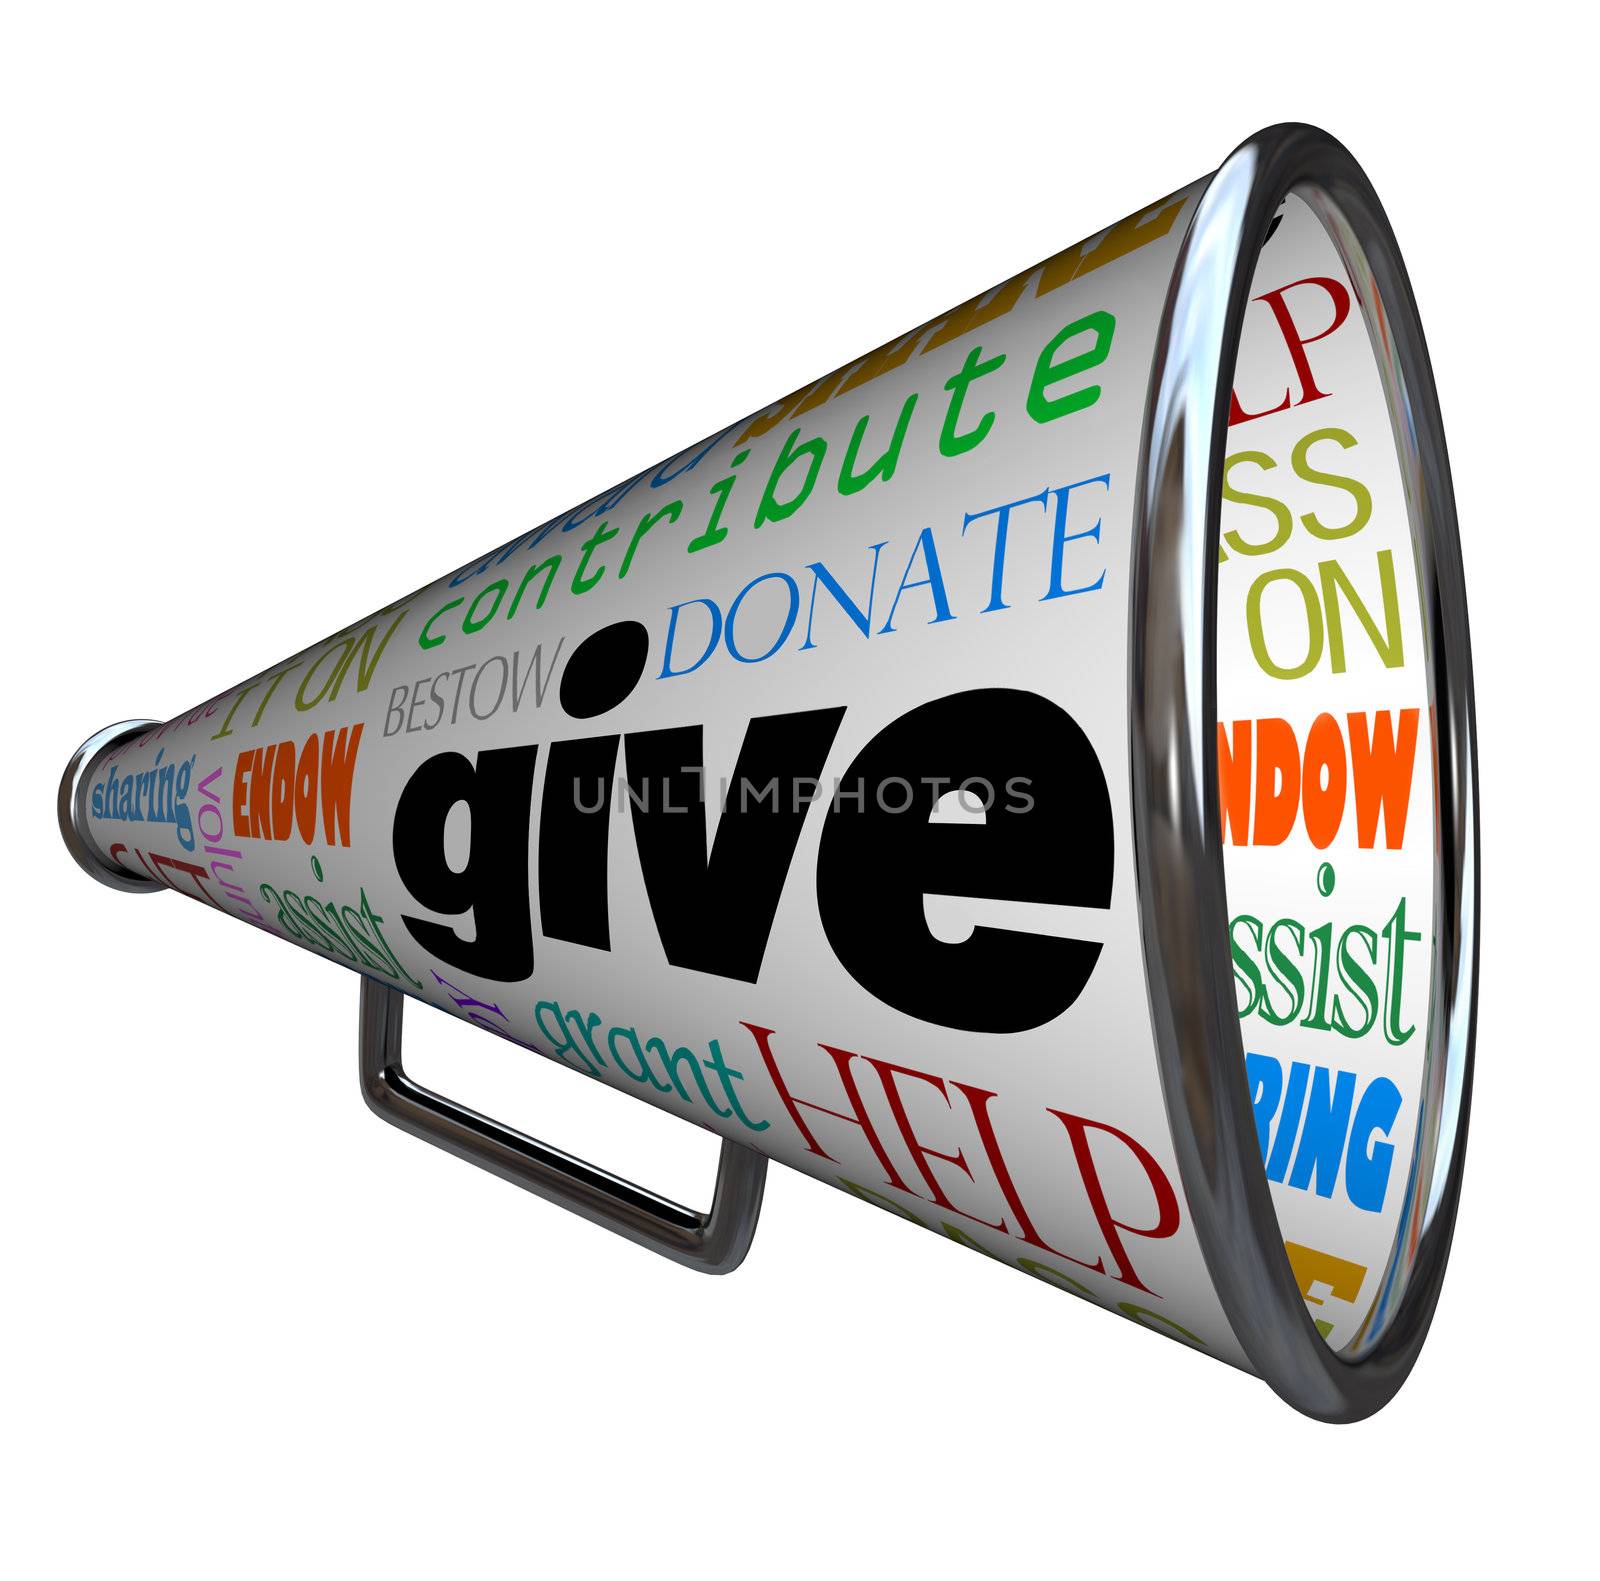 A bullhorn with many words on it calling for financial and moral support such as give, donate, contribute, help, assist, endow, share, volunteer, and more